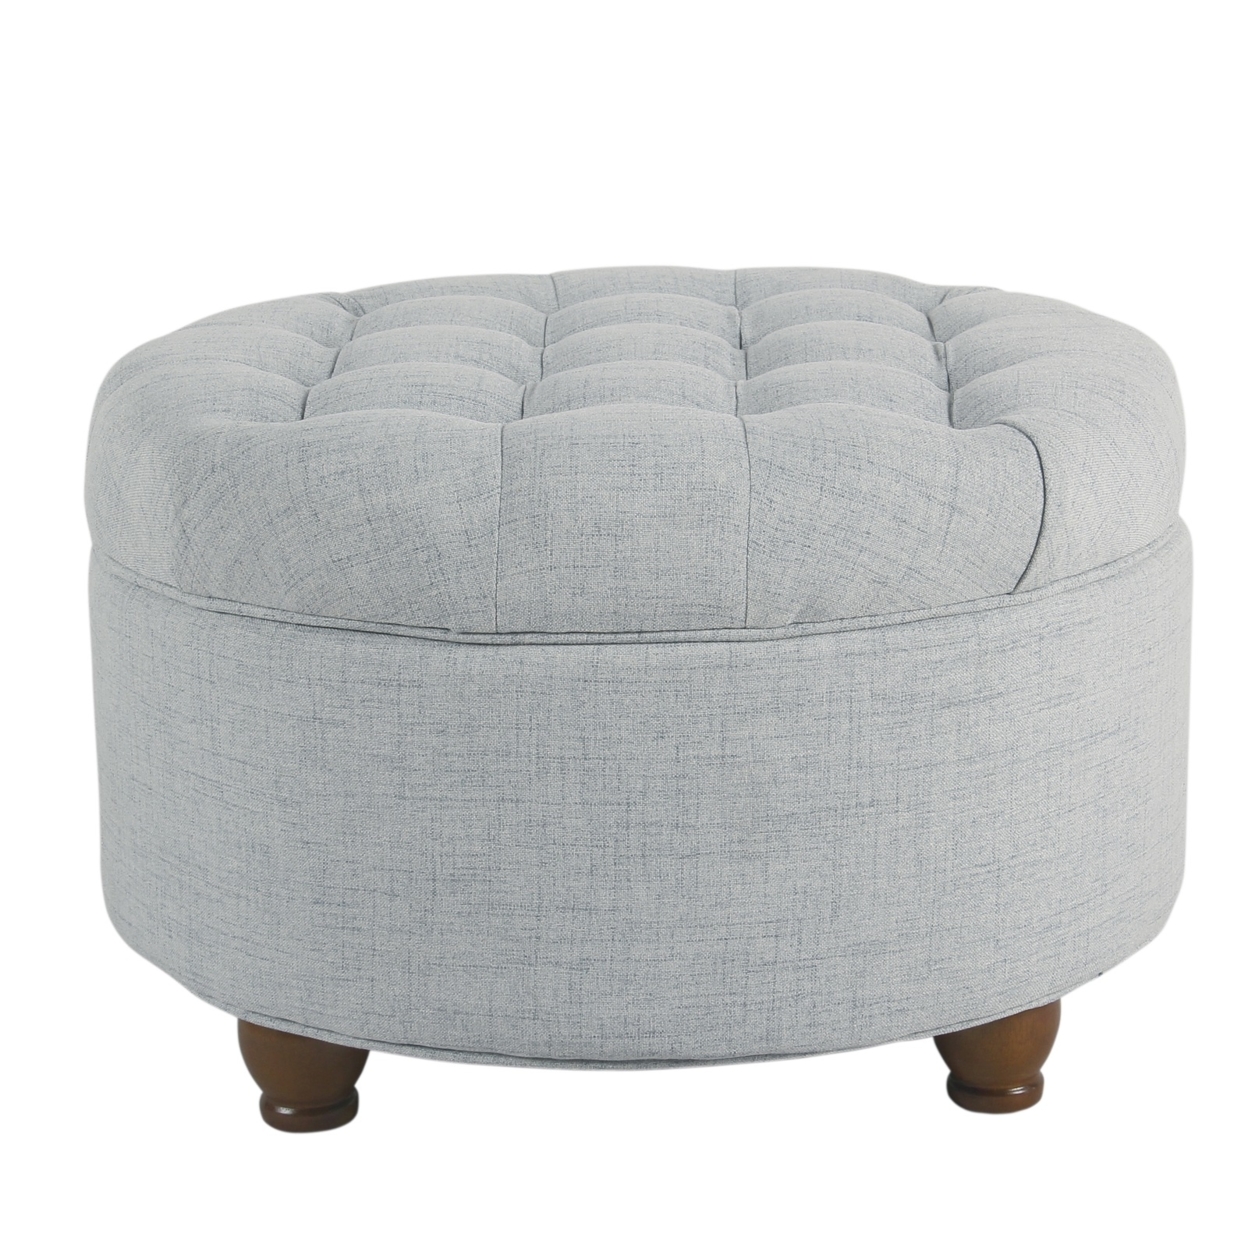 Fabric Upholstered Wooden Ottoman With Tufted Lift Off Lid Storage, Light Blue- Saltoro Sherpi